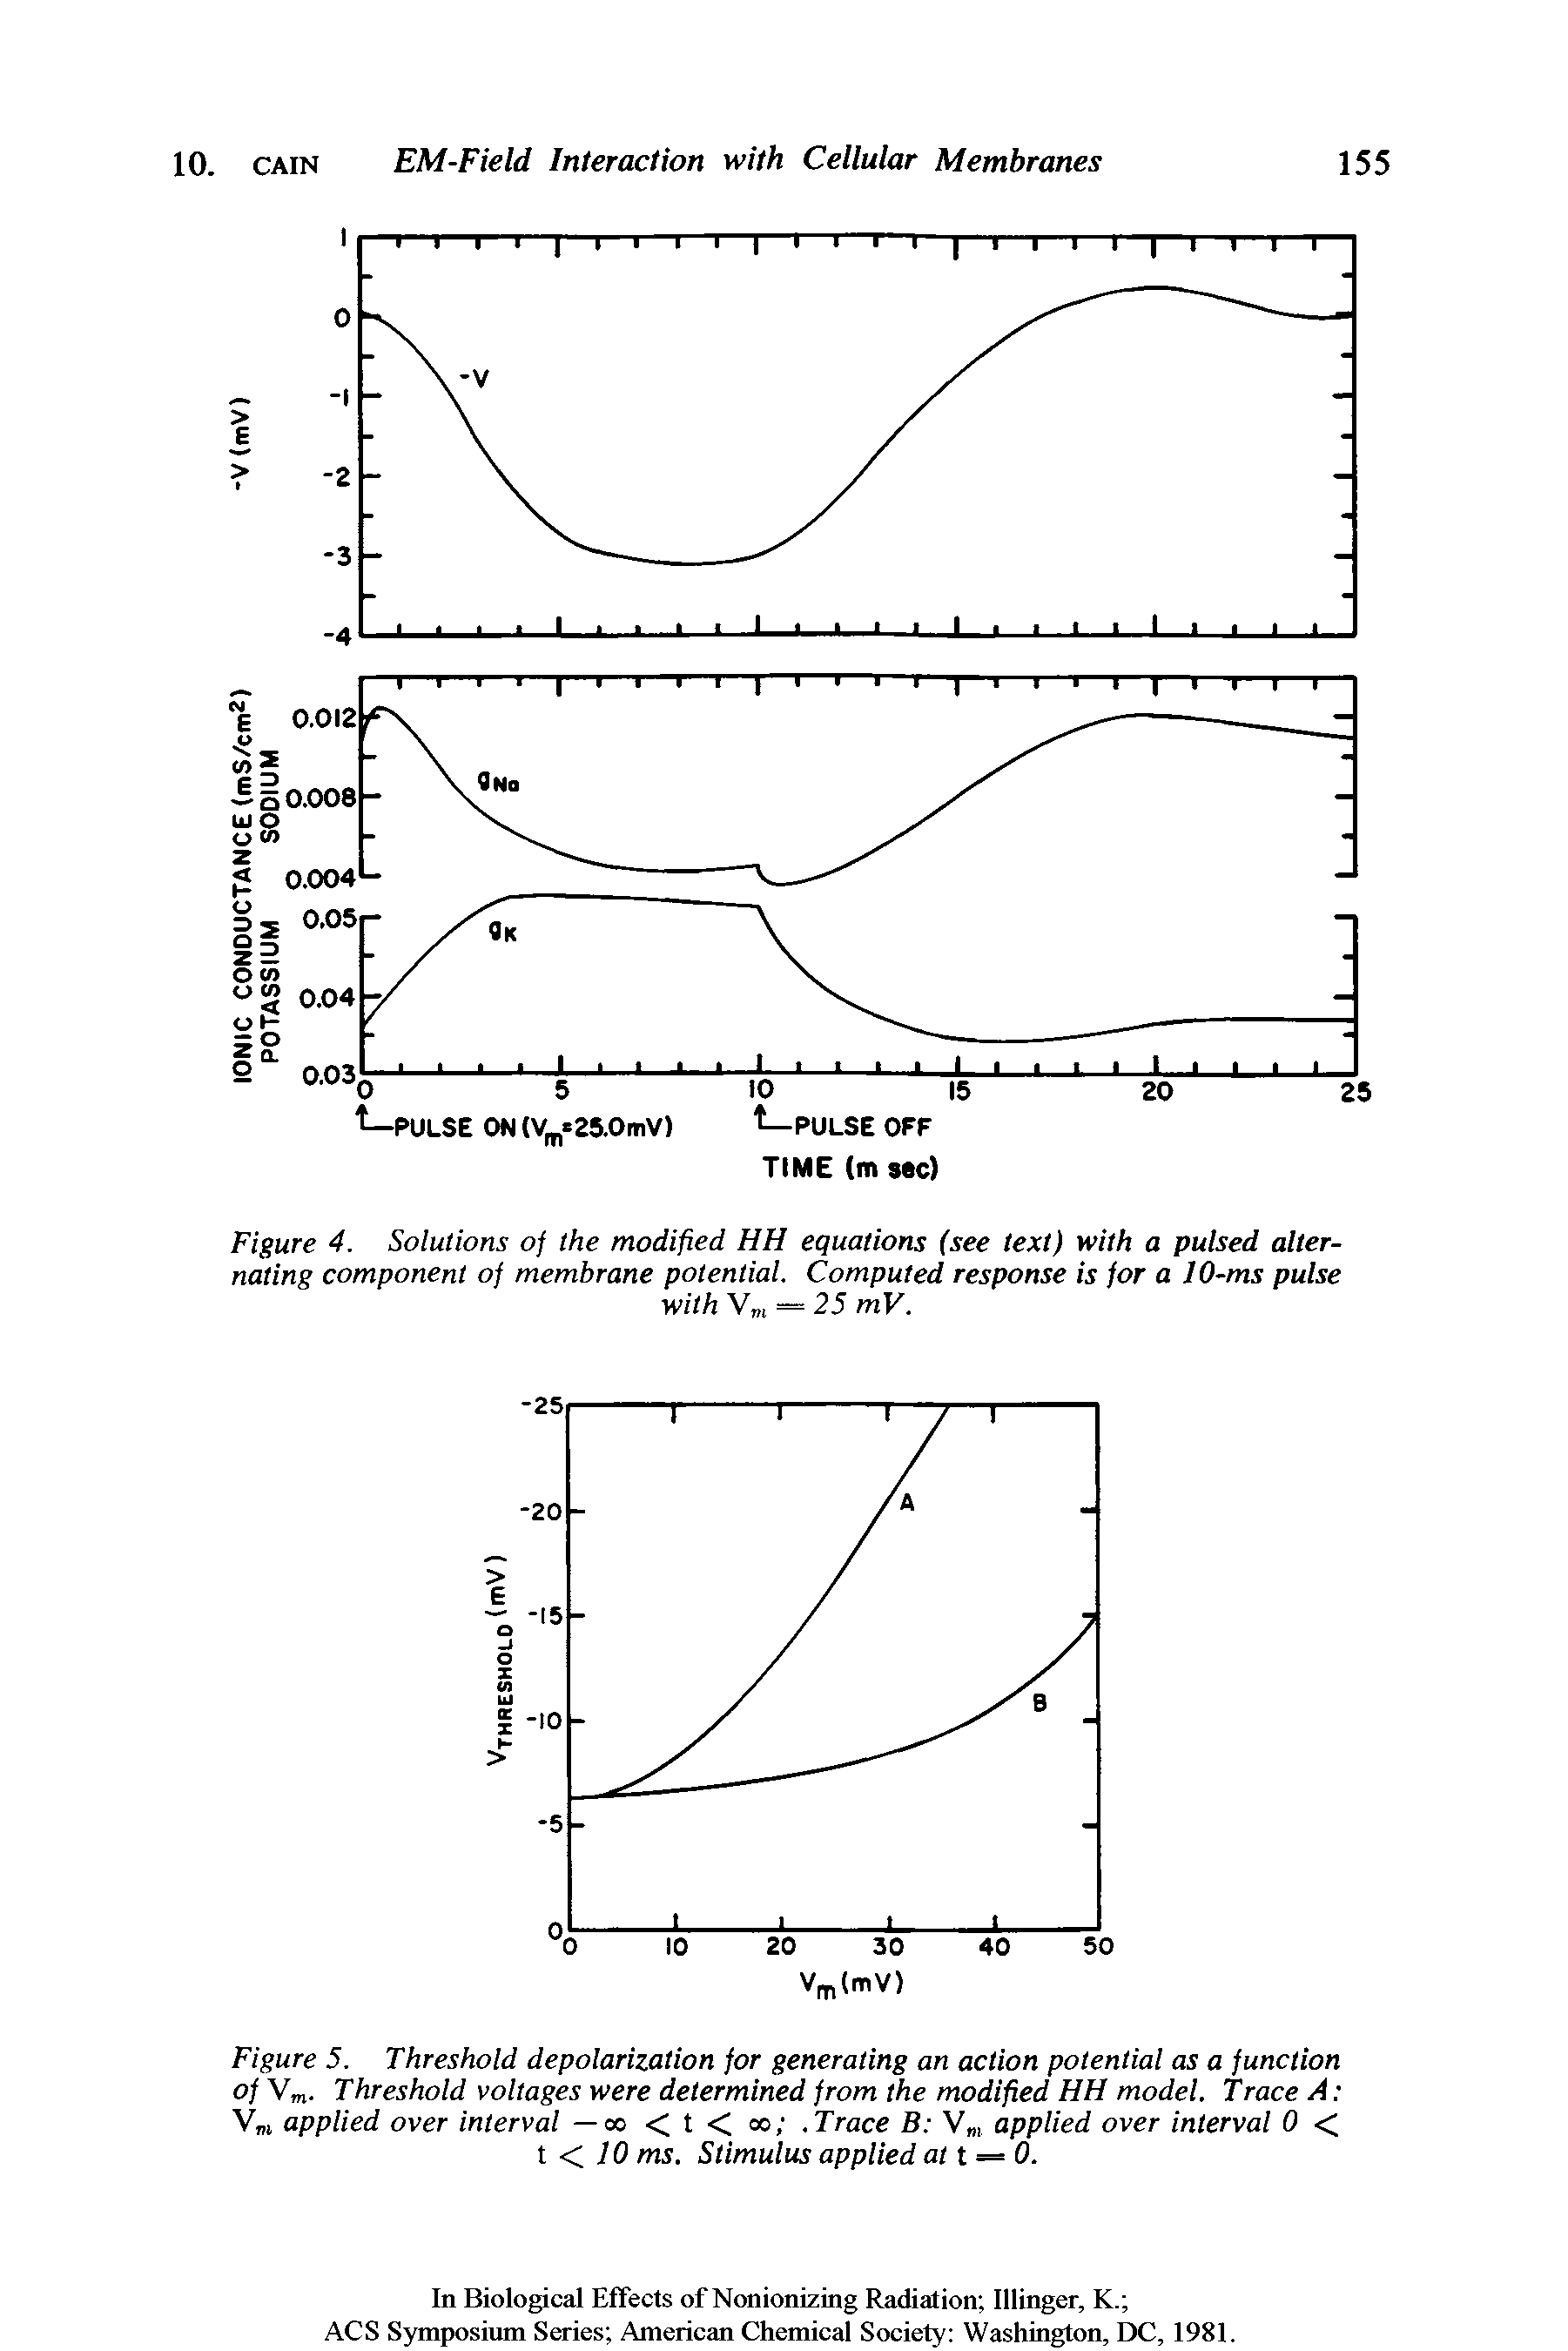 Figure 5. Threshold depolarization for generating an action potential as a function of Vm. Threshold voltages were determined from the modified HH model. Trace A V , applied over interval — oo < t < oo . Trace B V , applied over interval 0 < t < 10 ms. Stimulus applied at t = 0.